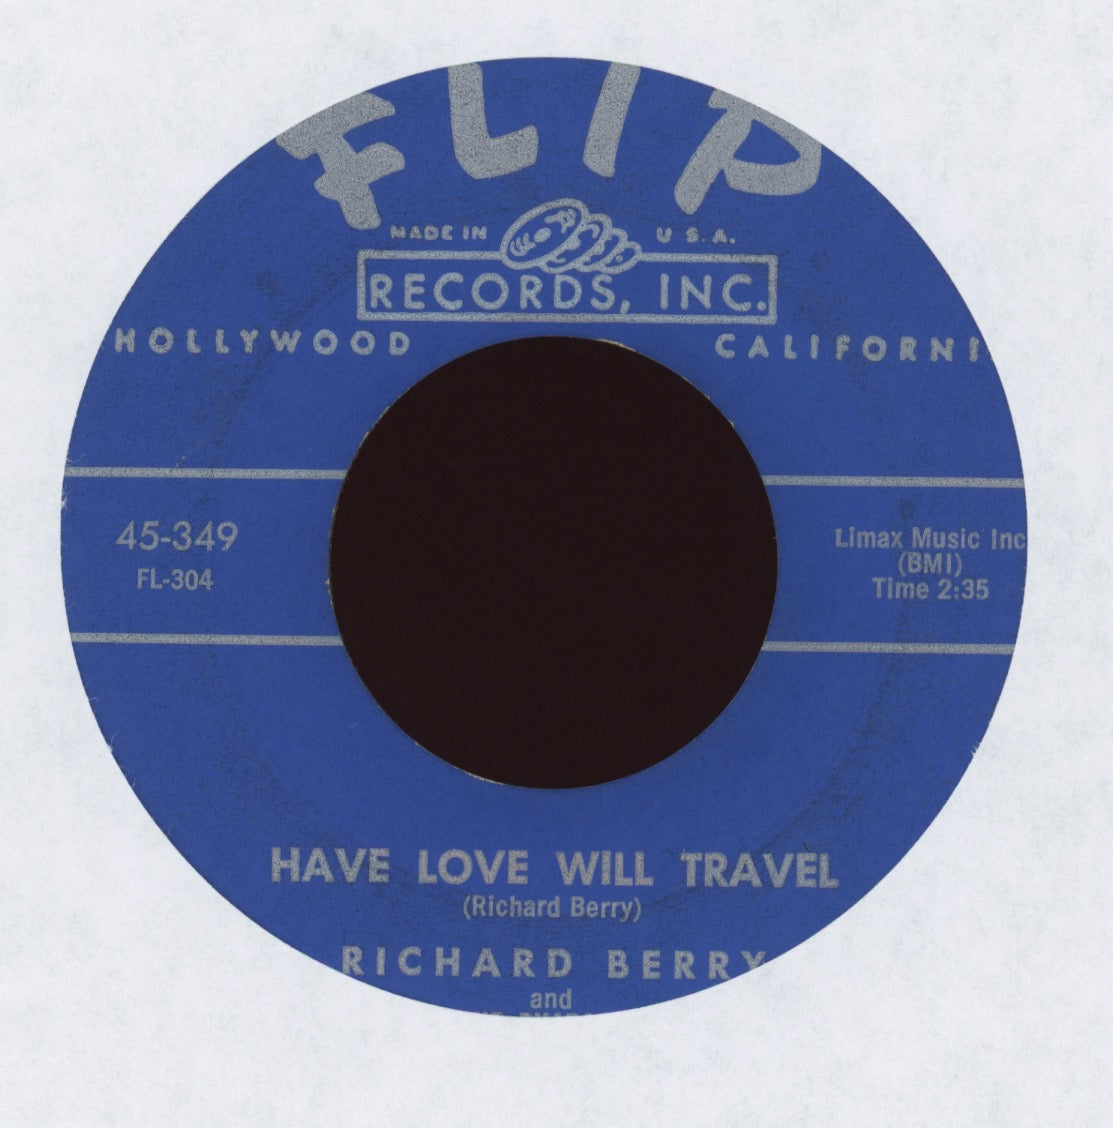 Richard Berry - Have Love Will Travel on Flip